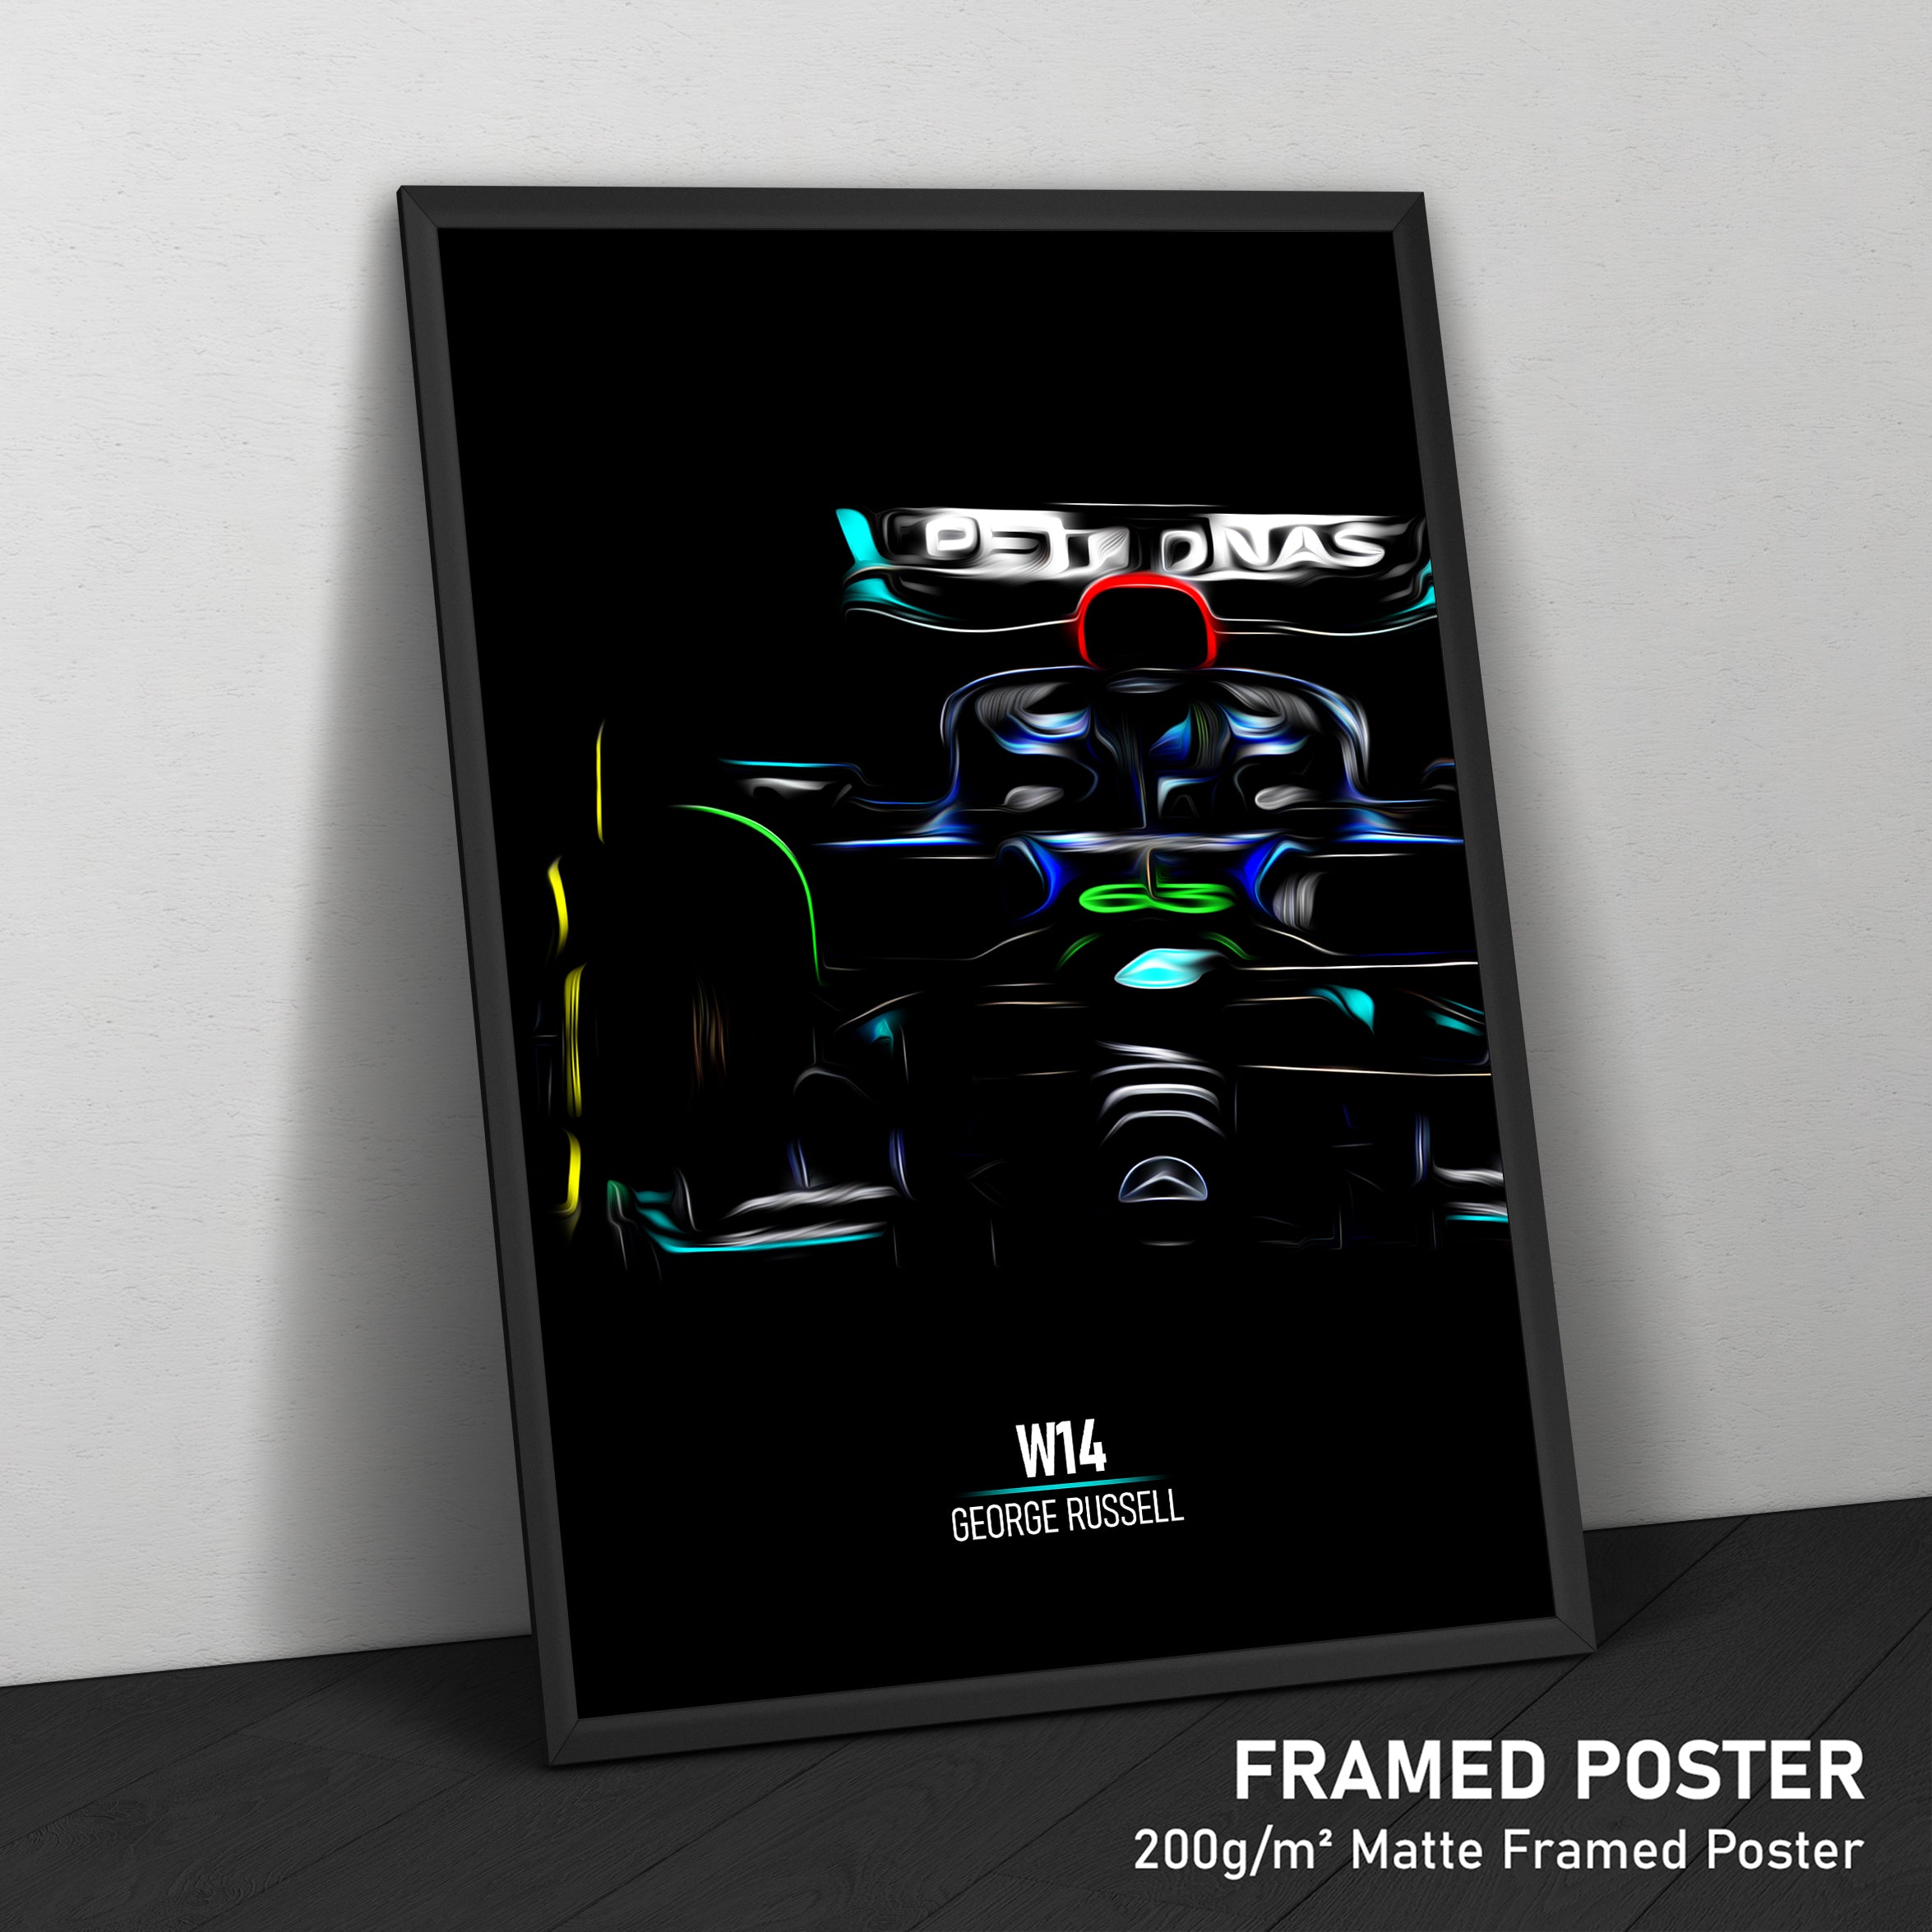 Mercedes W14, George Russell - Formula 1 Framed Poster Print